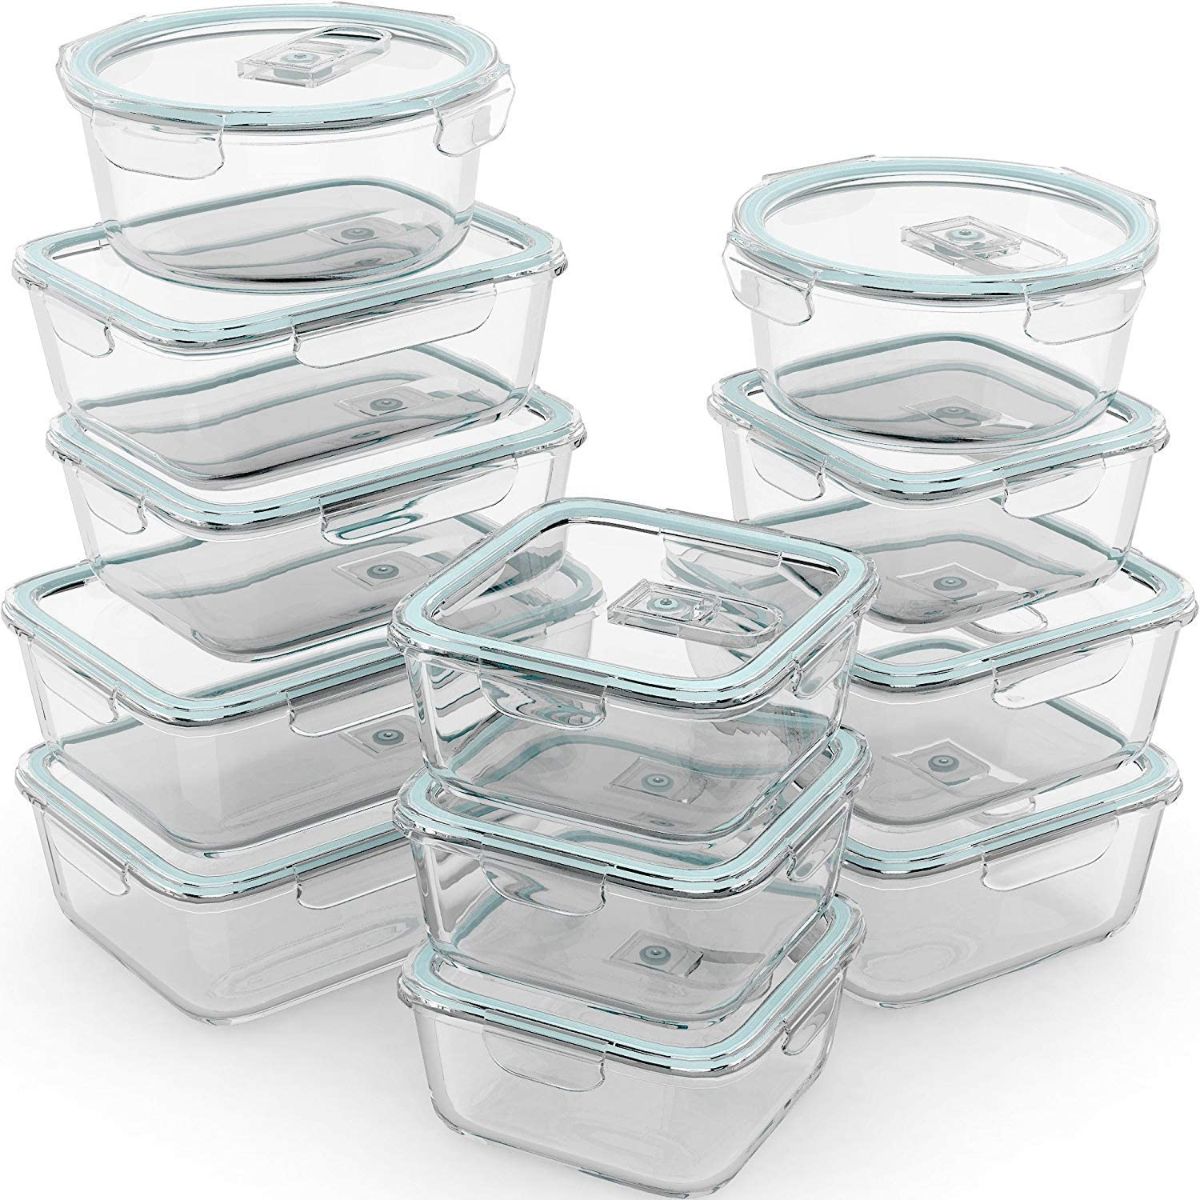 12 Best Freezer Containers To Keep Your Food Fresh And Organized 